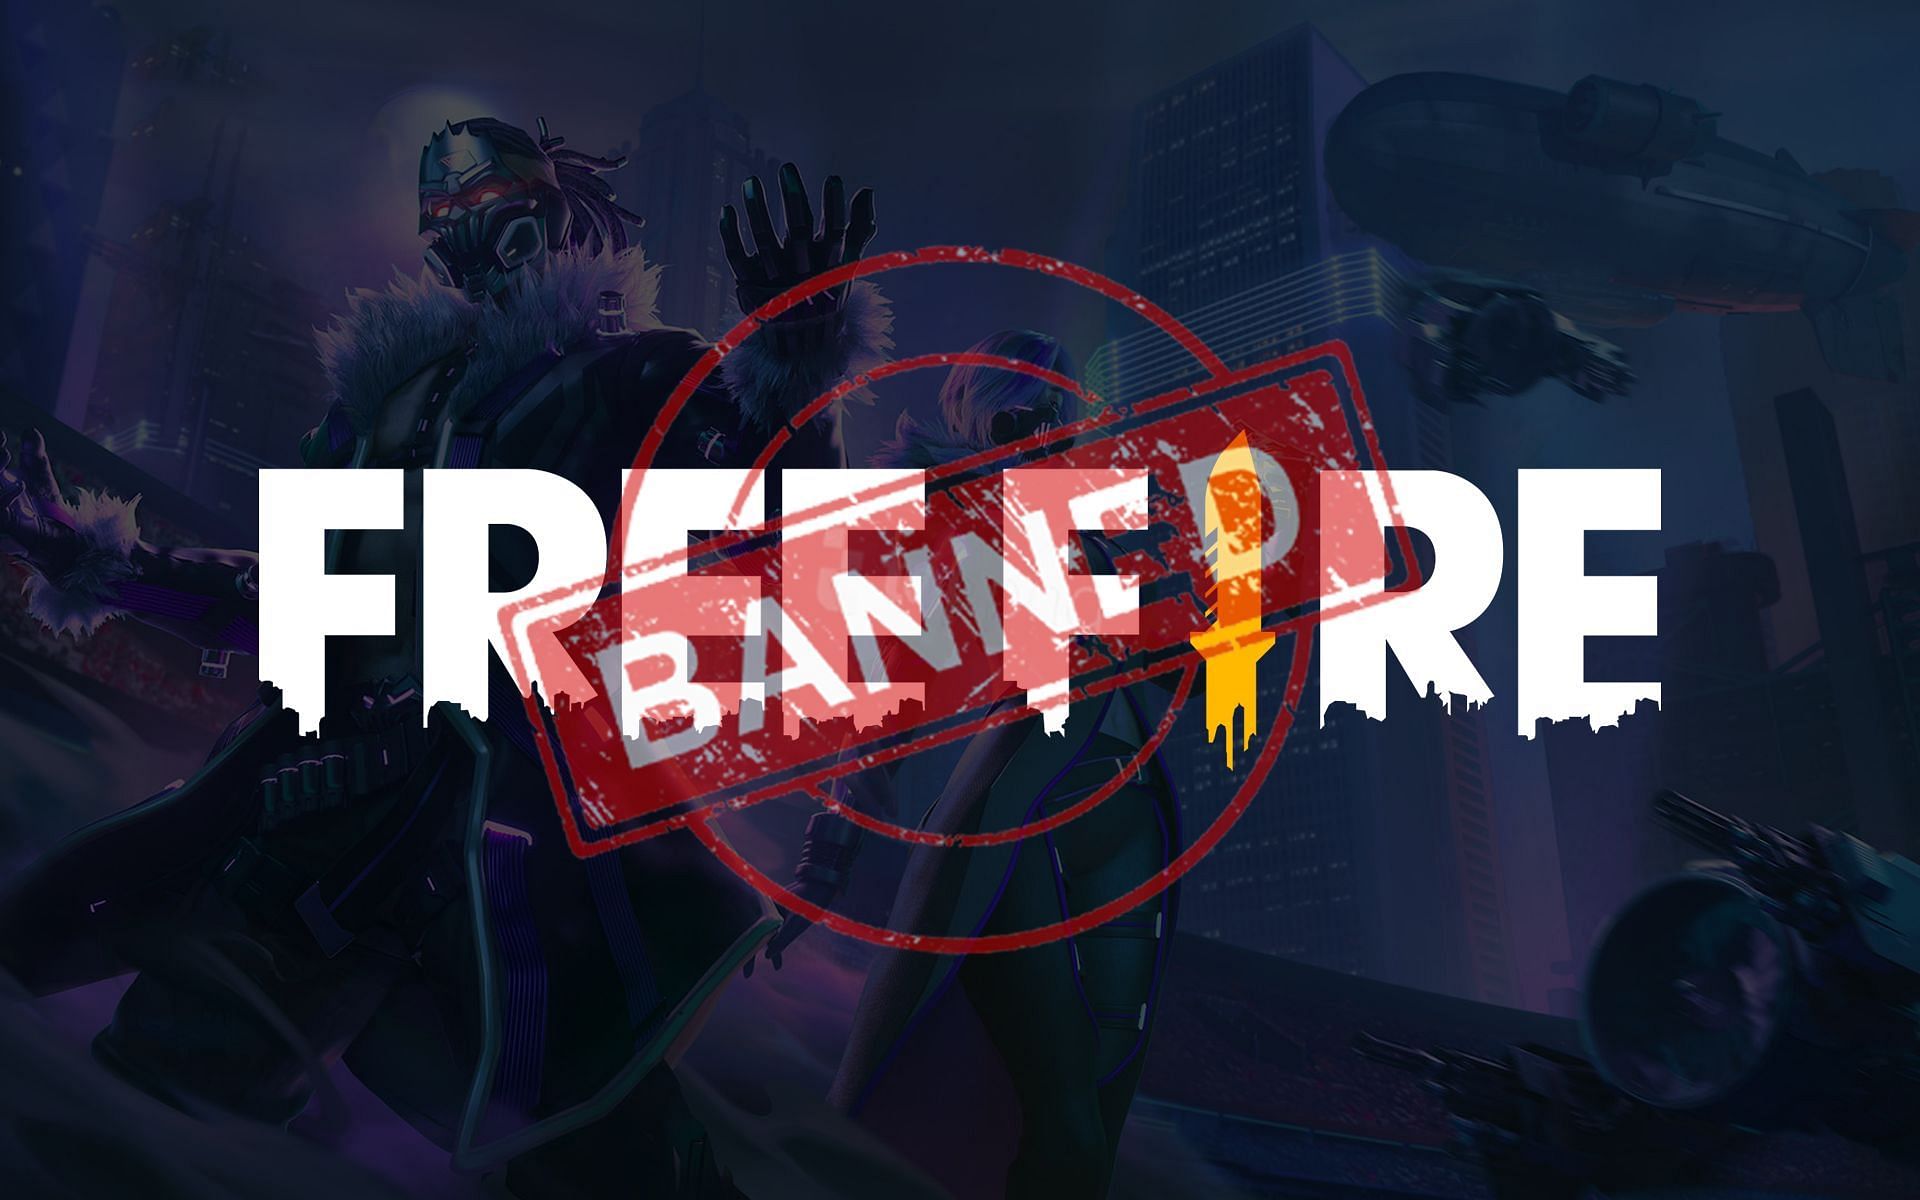 Garena Free Fire, 53 other 'Chinese' apps banned: Full list of